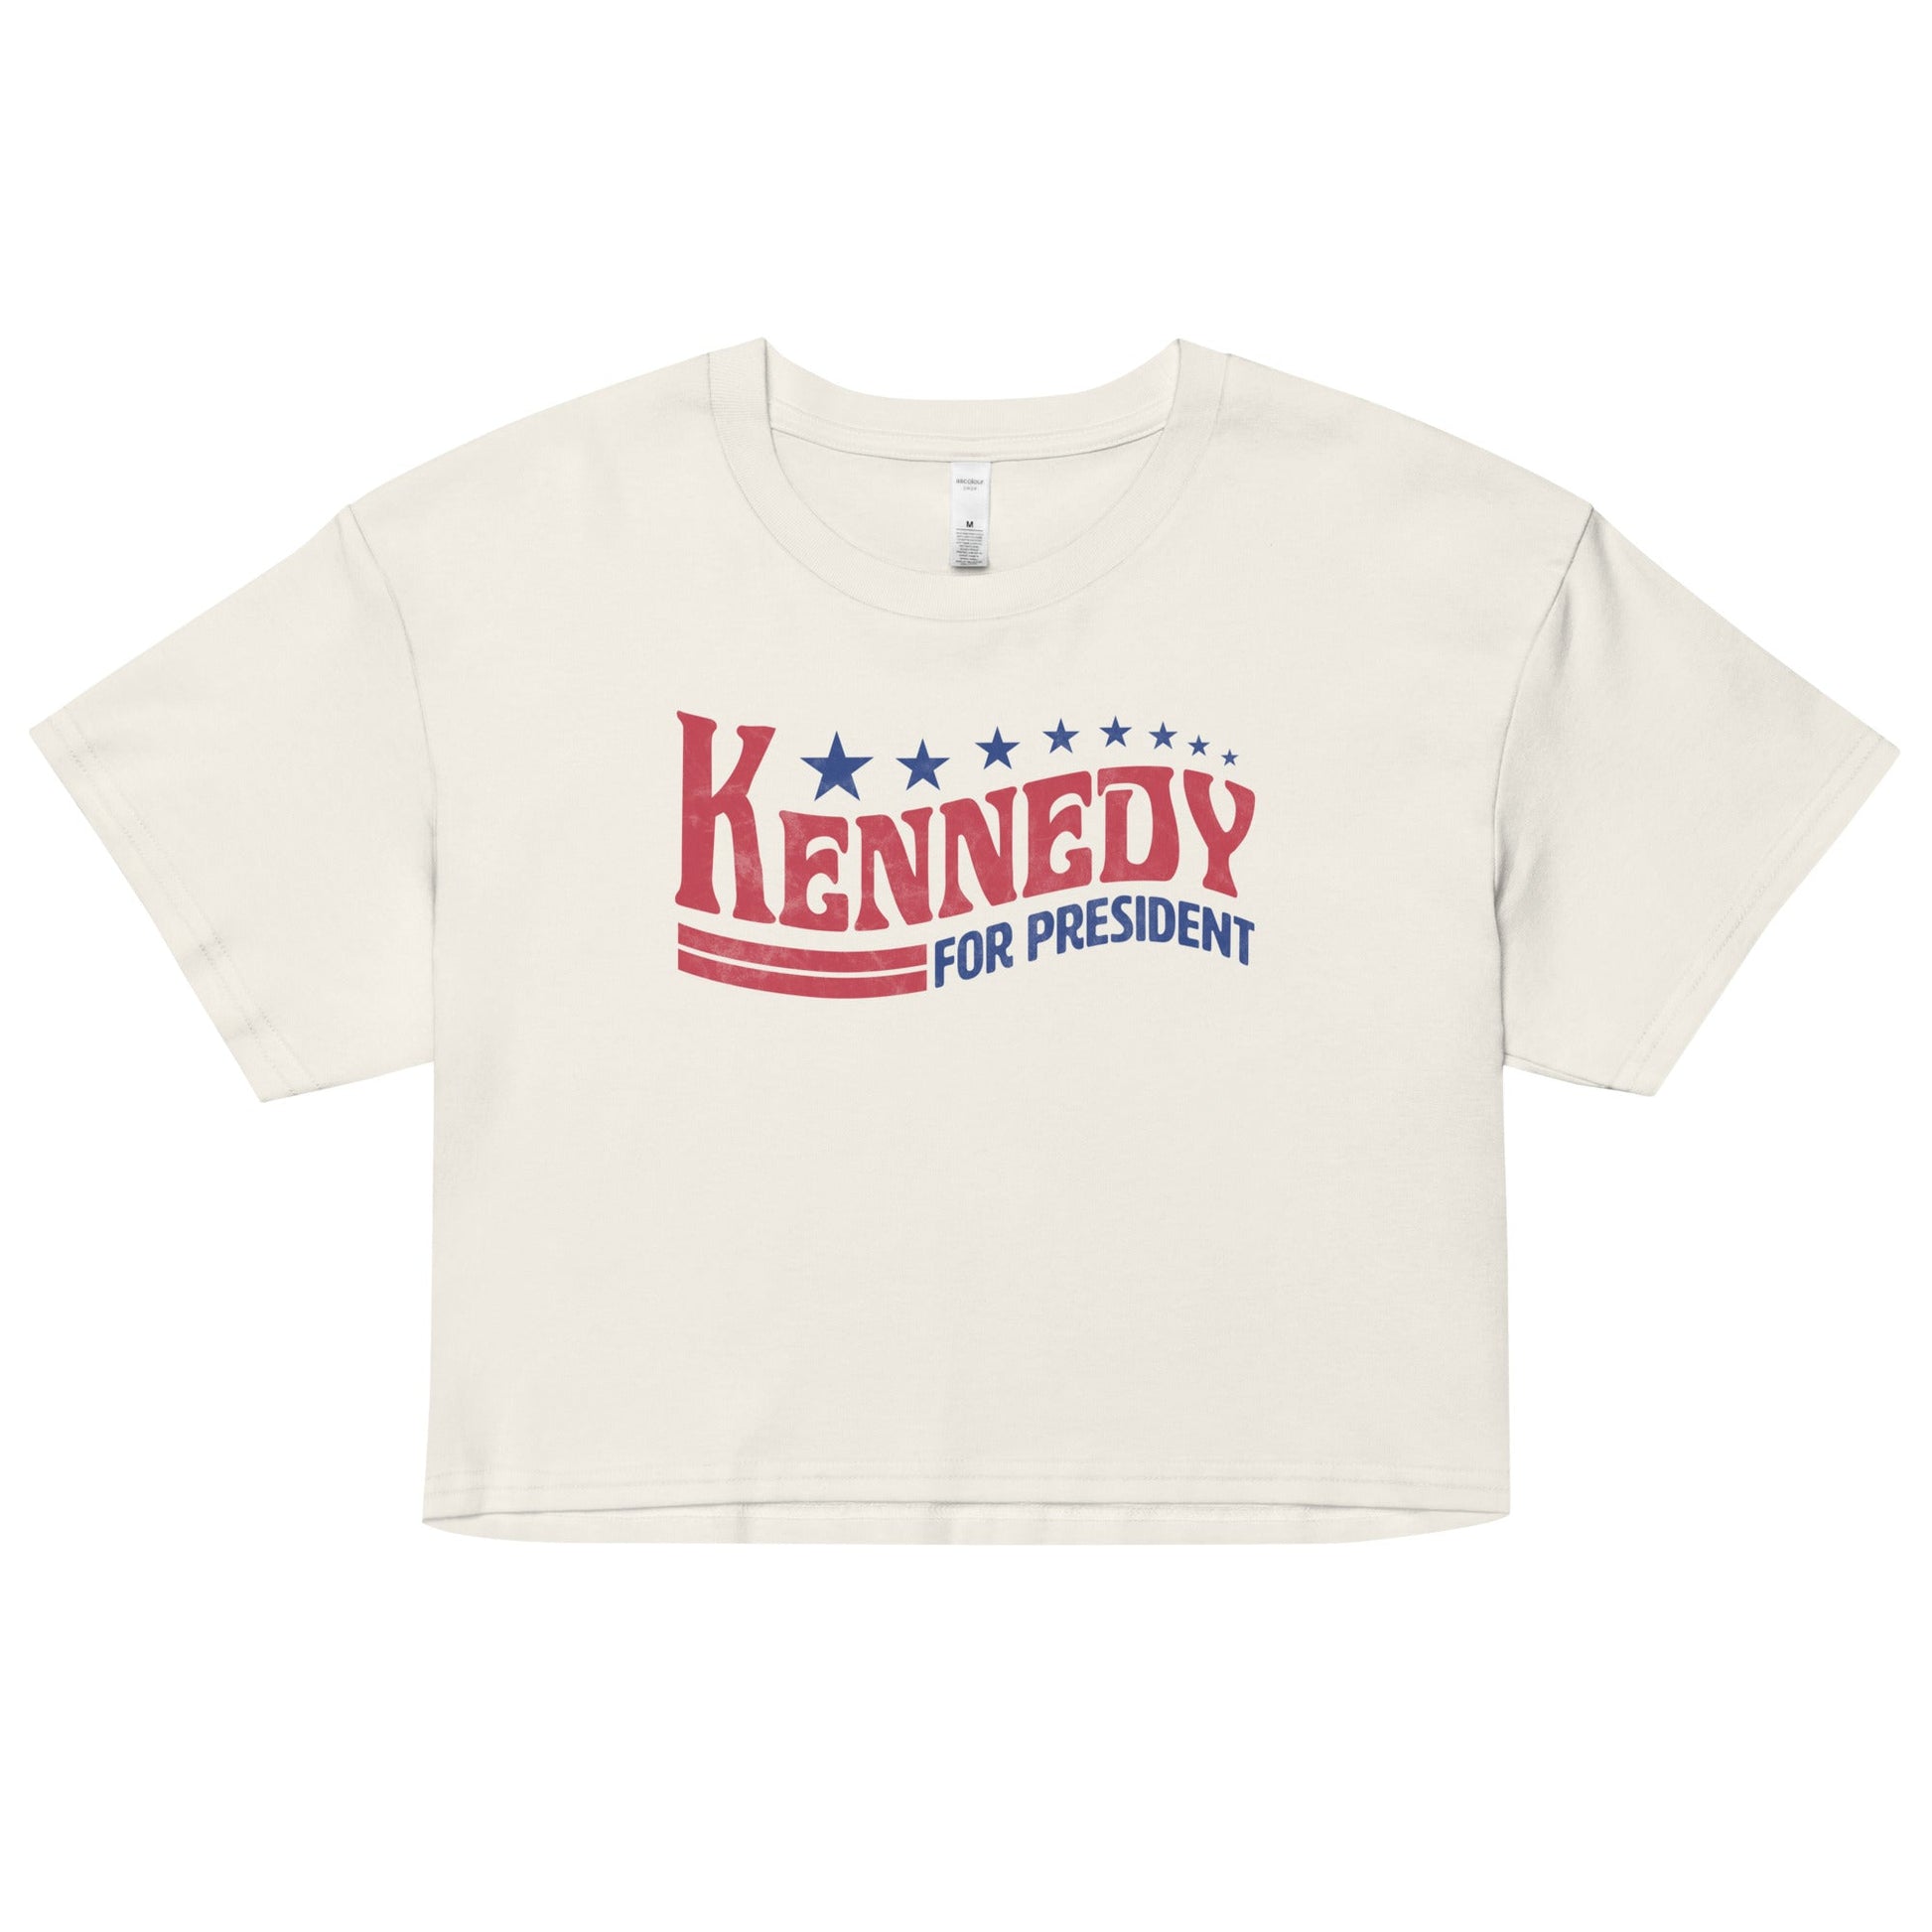 Kennedy for President Vintage Women’s Crop Top - TEAM KENNEDY. All rights reserved